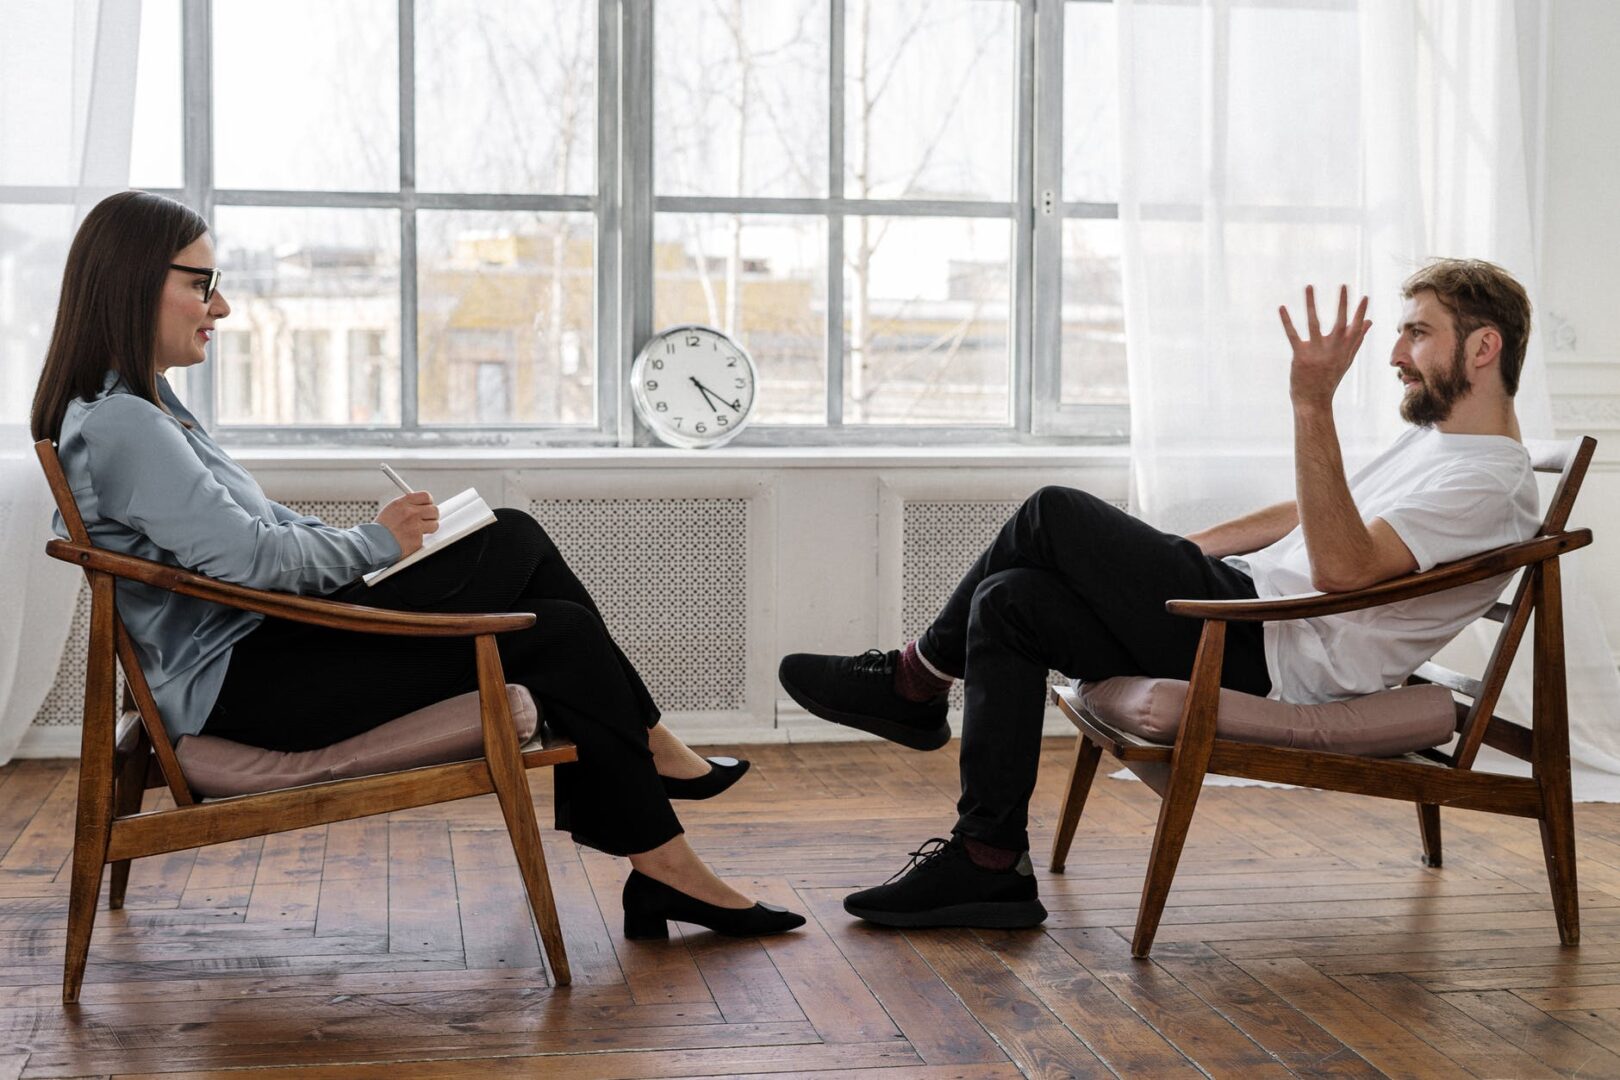 Two people sitting in chairs on a wooden floor